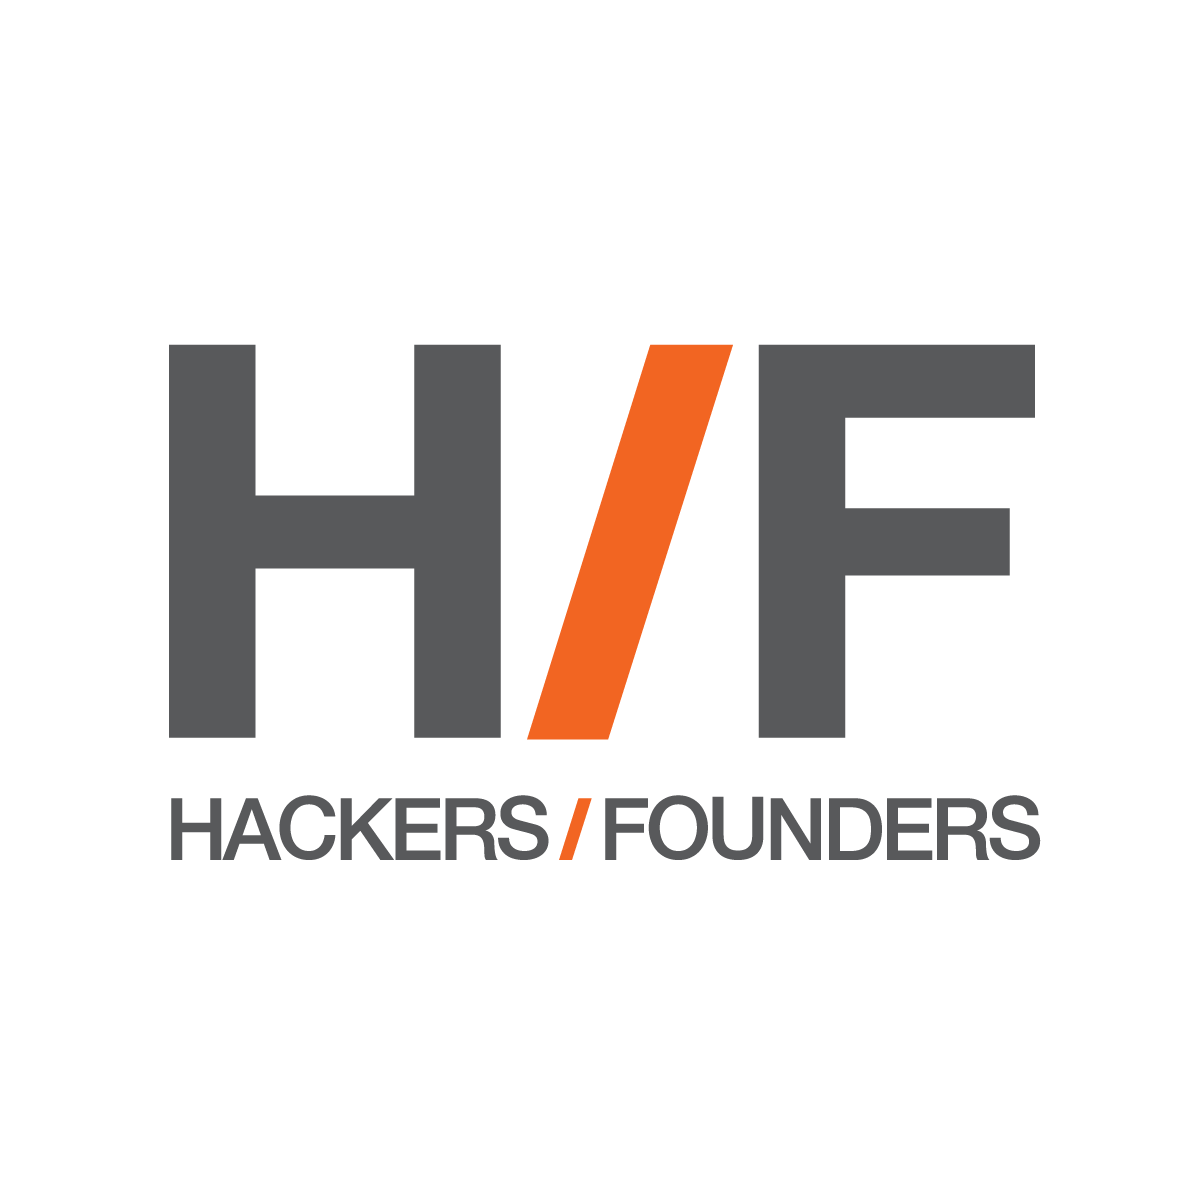 Founders Logo - File:Hackers and Founders Logo.png - Wikimedia Commons